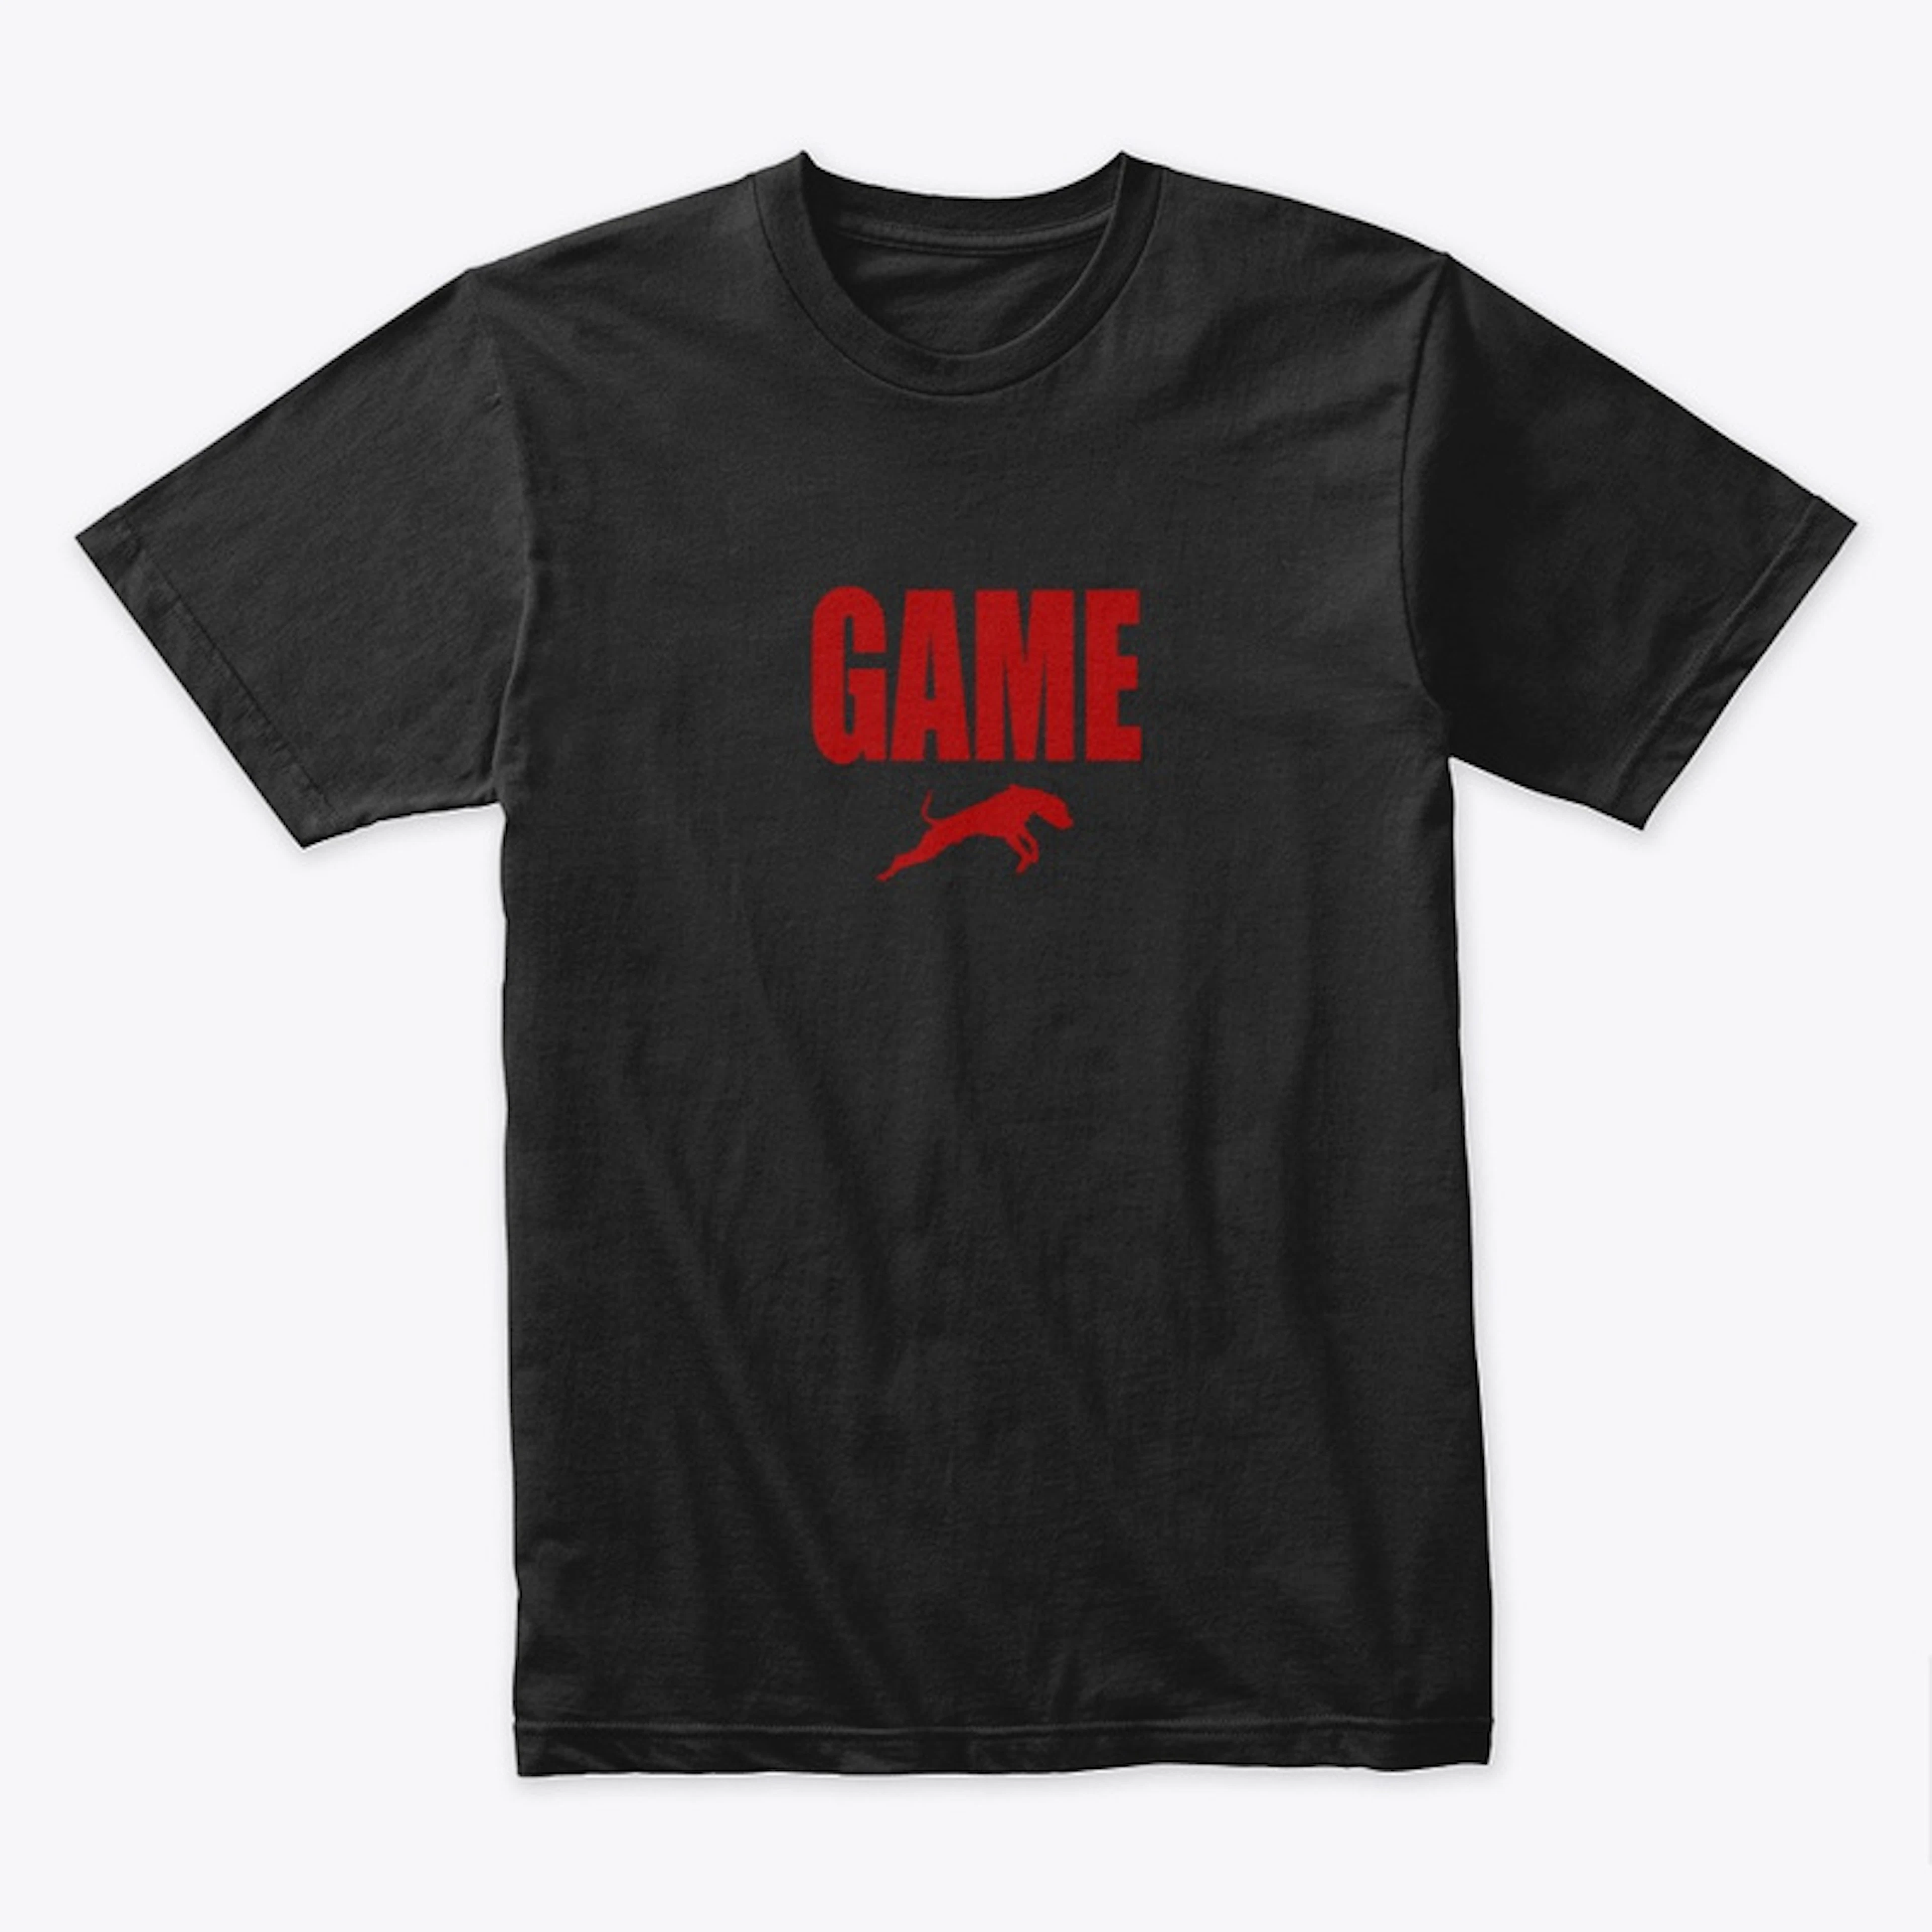 2022 RED GAME TEE FROM BBK9